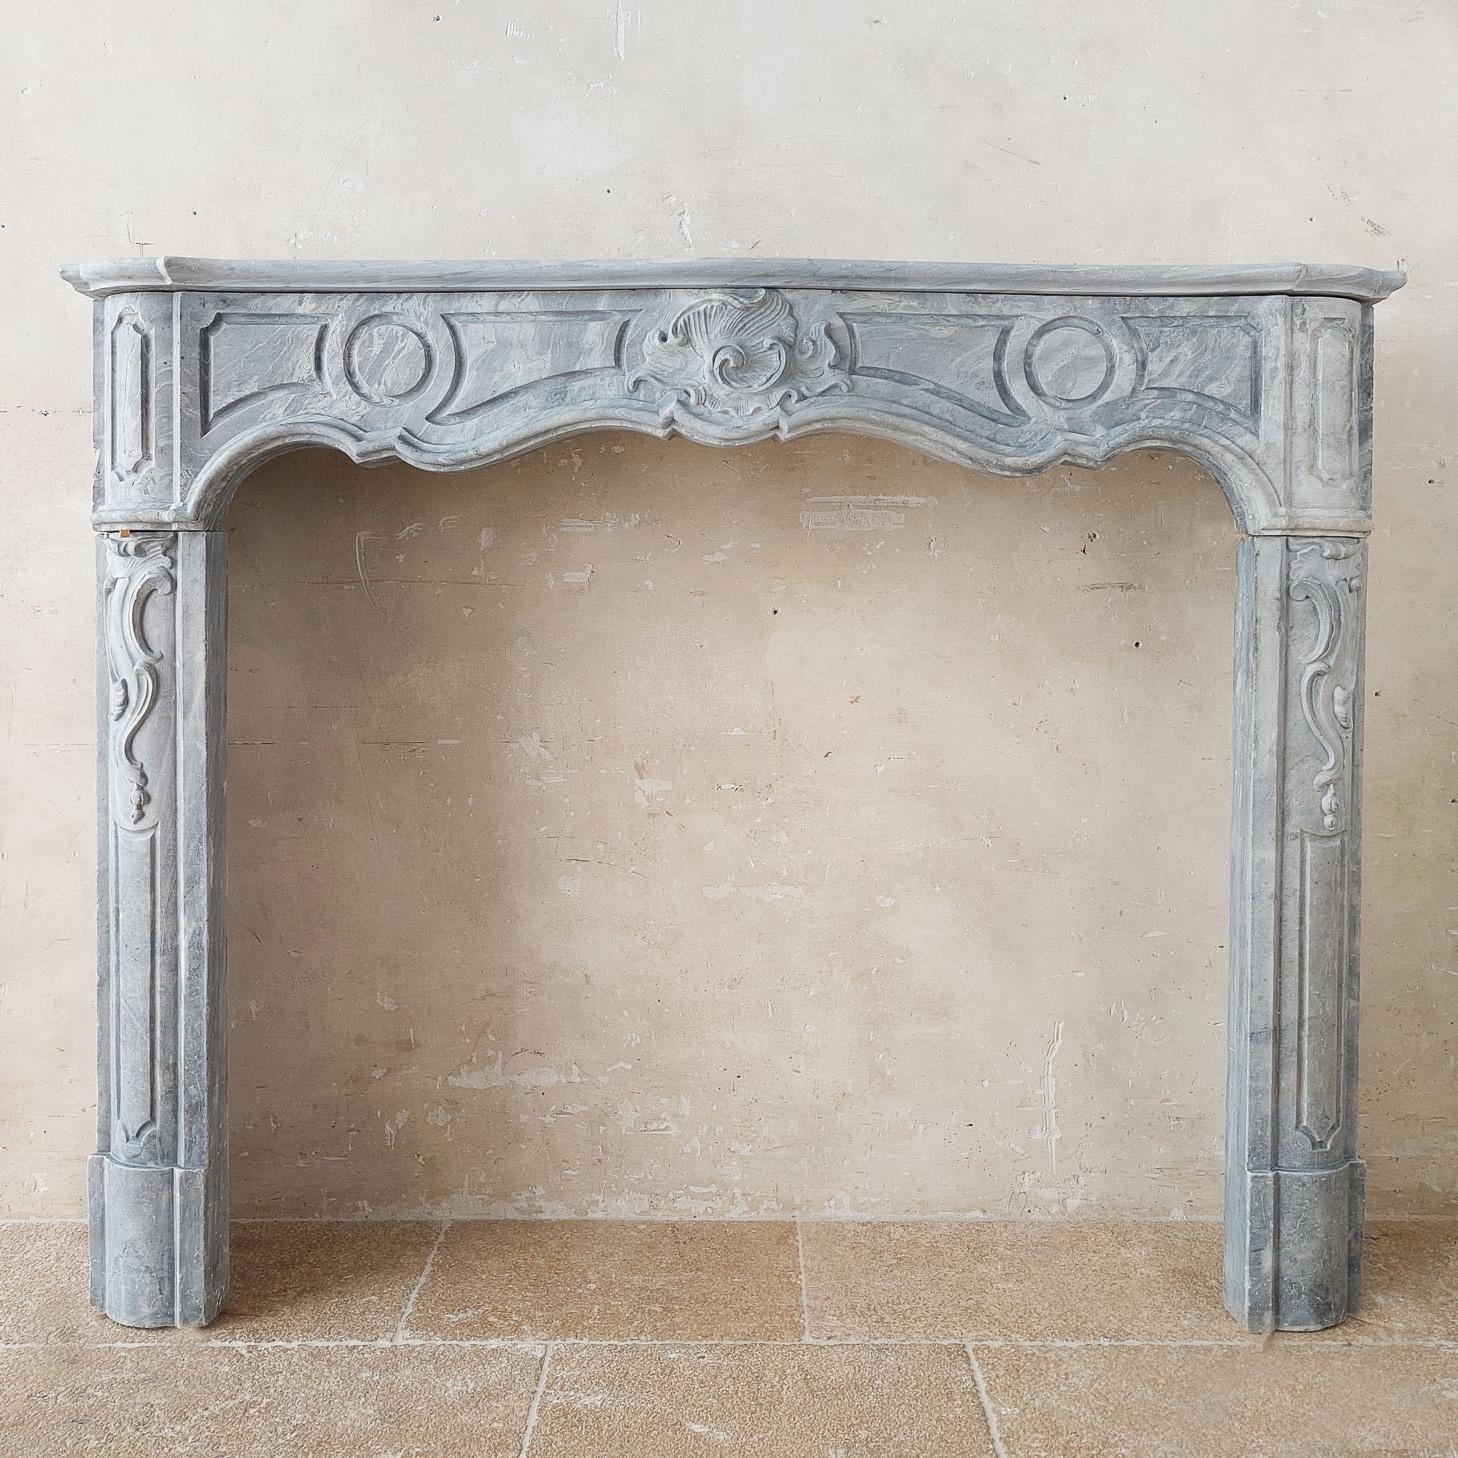 18th century Dutch Blue Turquin marble mantelpiece, in Régence Style with a Rococo shell ornament. This beautiful marble fireplace in soft grey tones originates from a Dutch canal house.

h 105.5 x w 133.5 x d 31 cm
opening: h 87 x w 104 cm